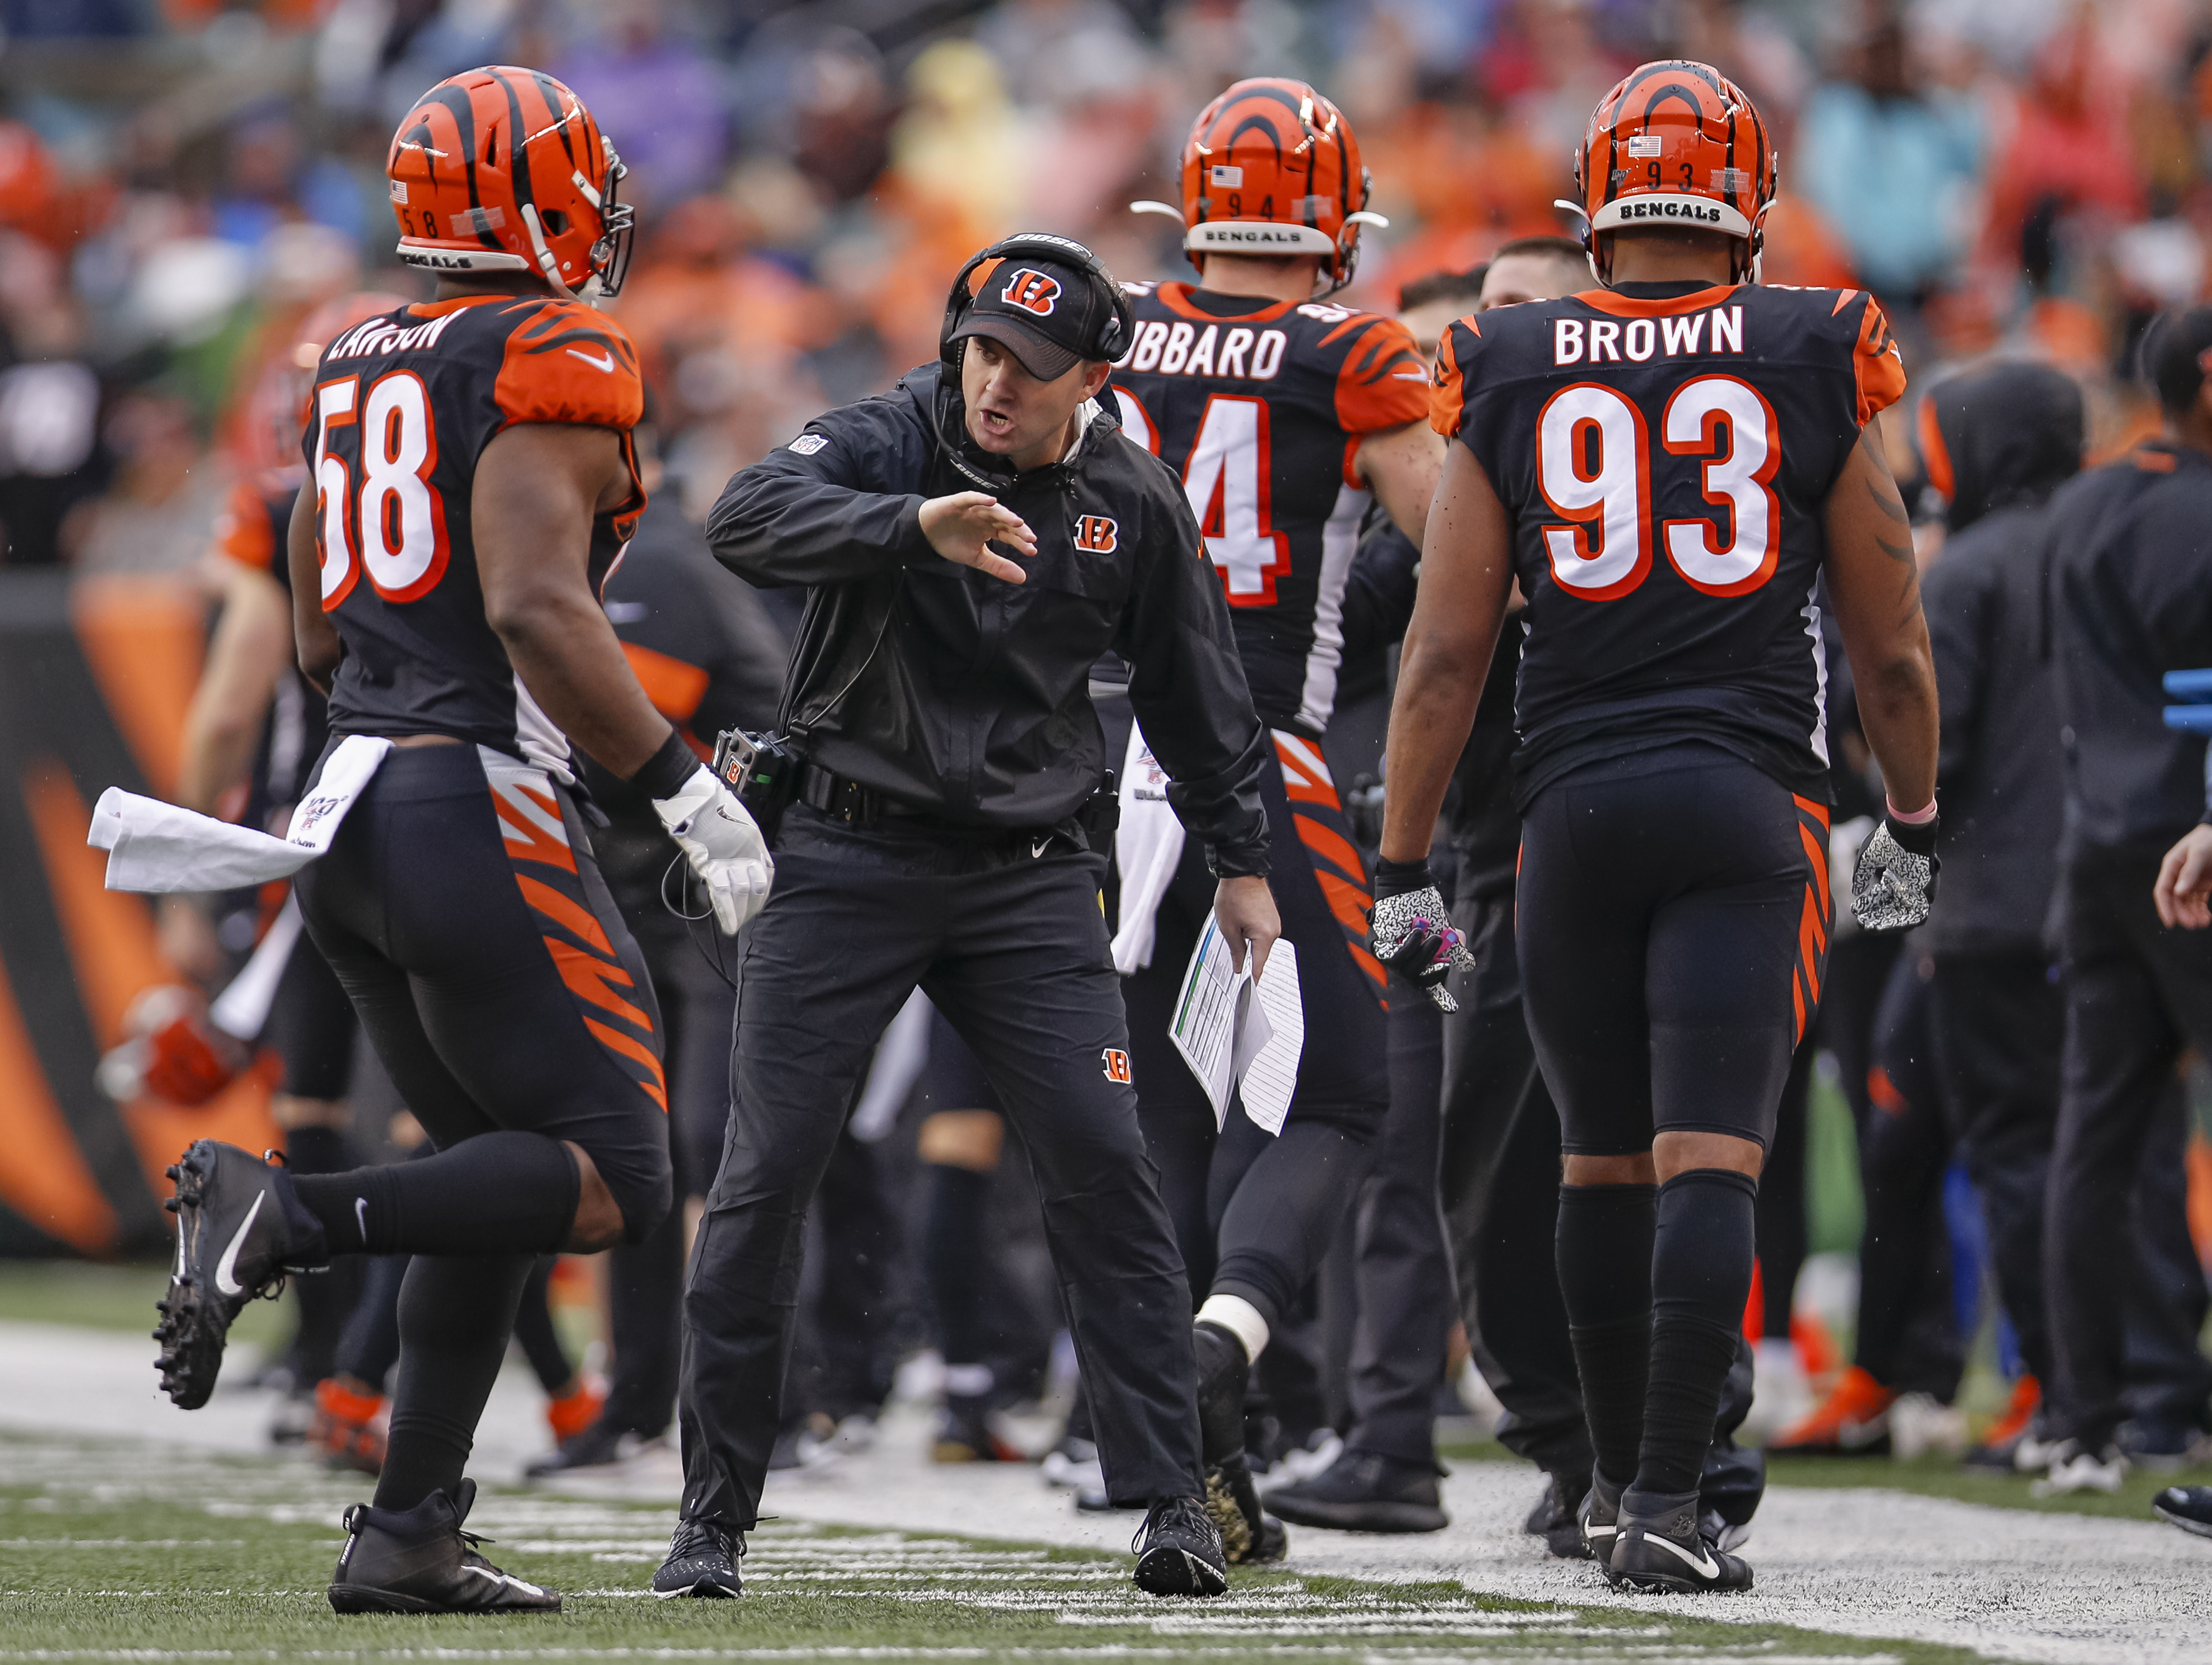 ANALYSIS: 5 takeaways from Bengals' season-opening loss to Browns